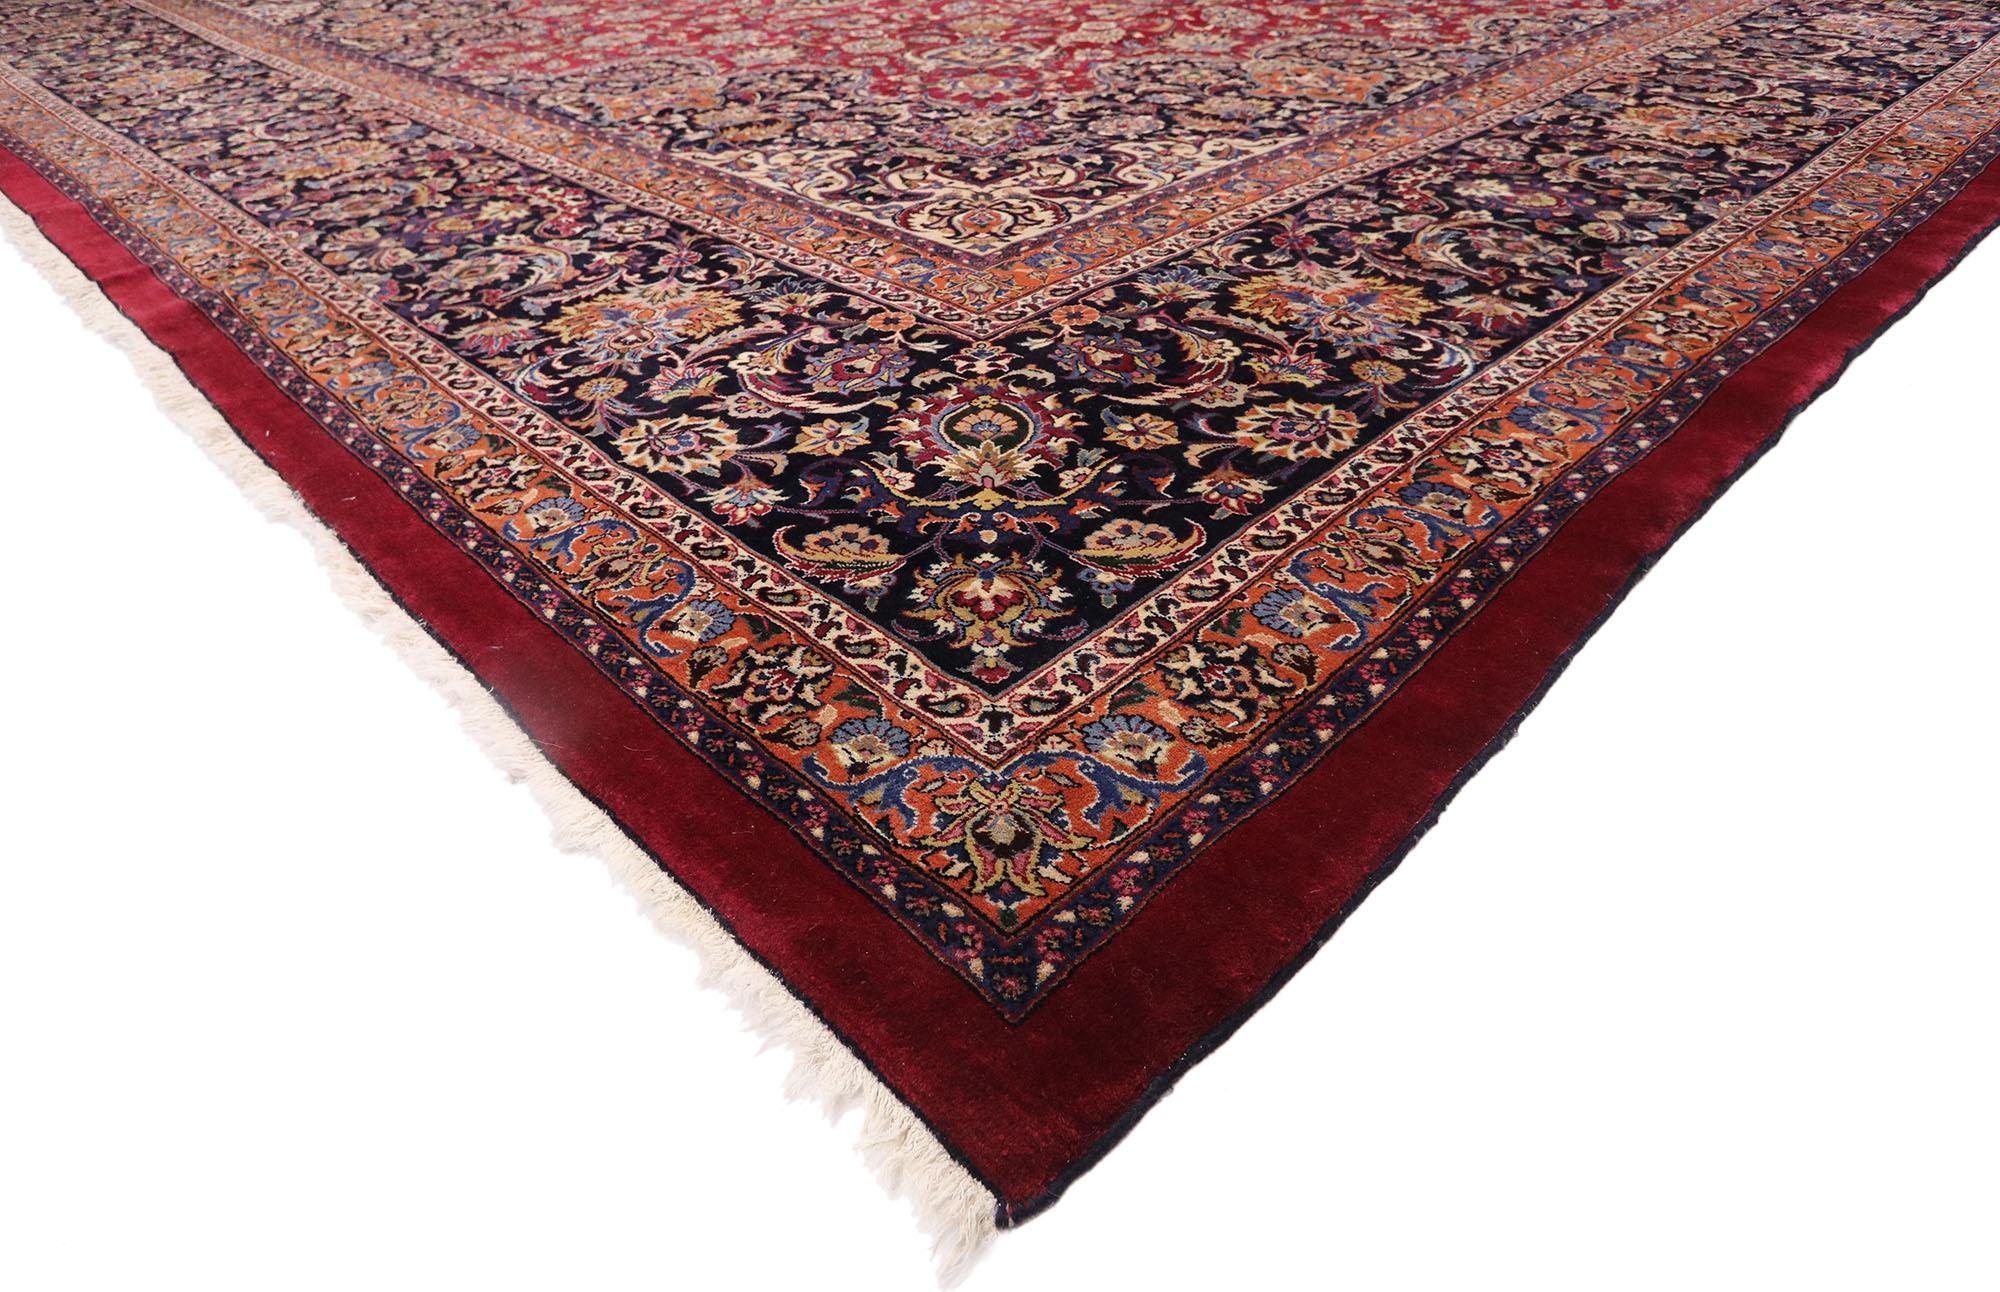 77405 Vintage Persian Mashhad Rug with Victorian Style 16'09 x 22'02.
Rich in color, texture and beguiling ambiance, this hand-knotted wool vintage Persian Mashhad palace rug beautifully displays timeless elegance and regal charm. A stunning